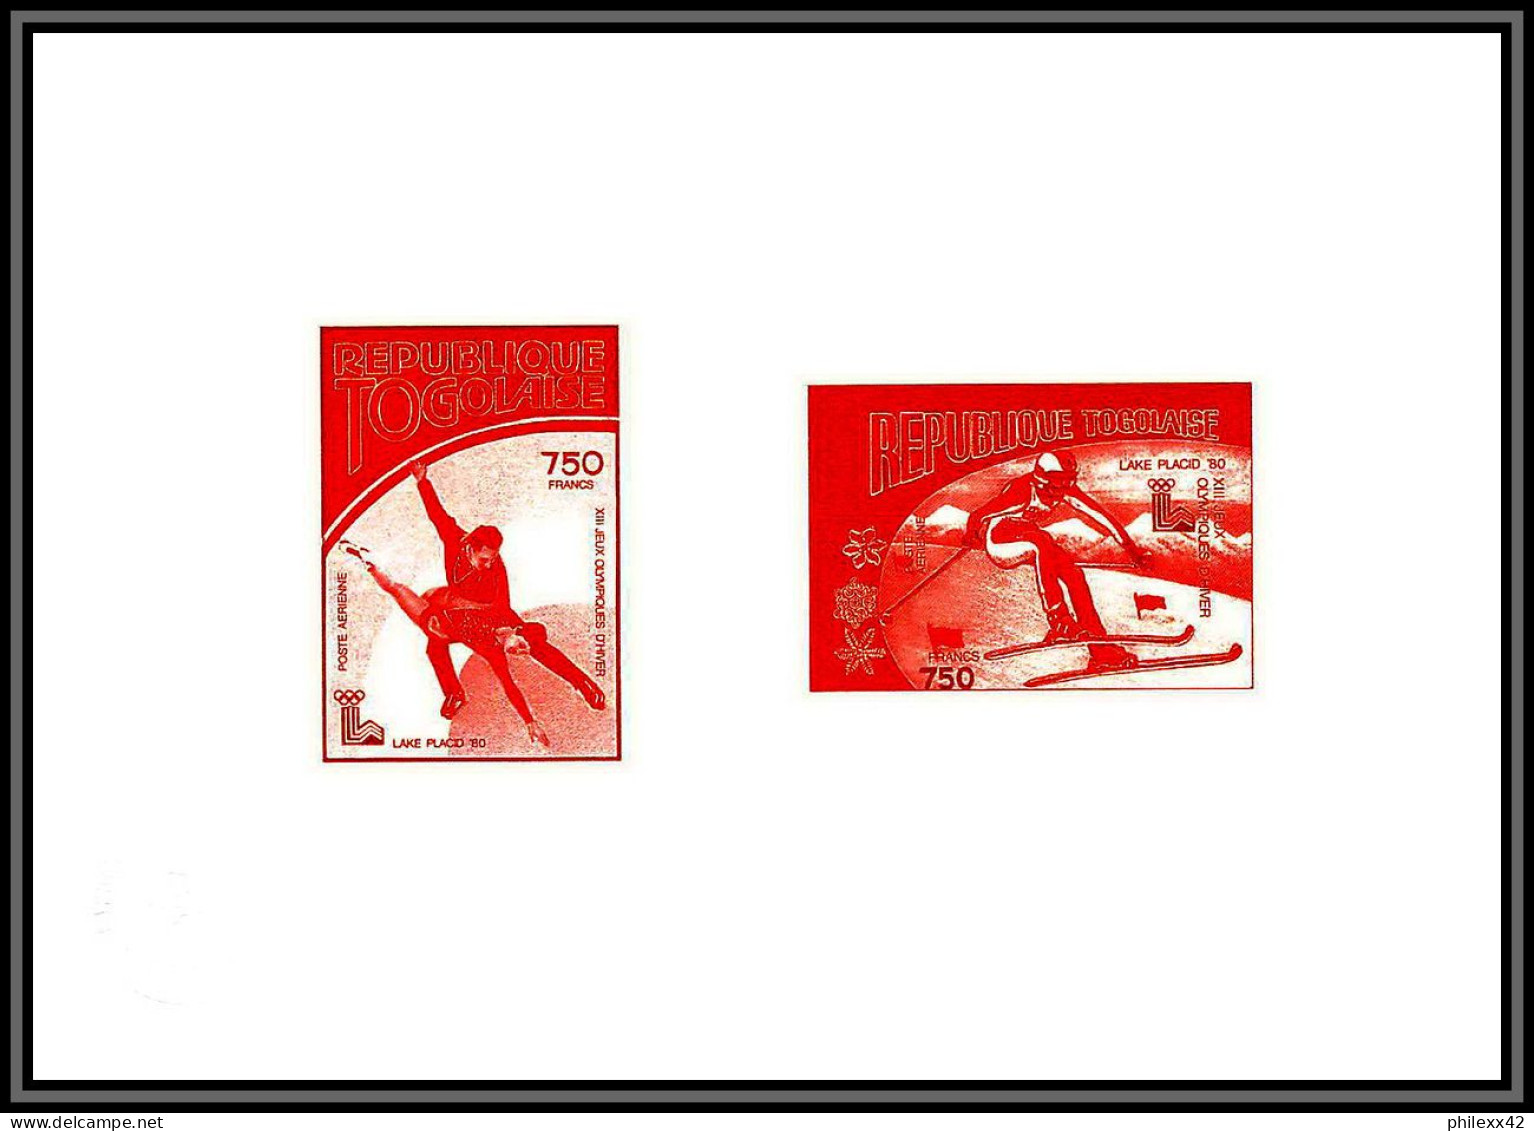 95341 N°153/152 Lake Placid Jeux Olympiques Olympic Games 1980 Togo Epreuve D'artiste Collective Artist Proof Red Ski - Invierno 1980: Lake Placid